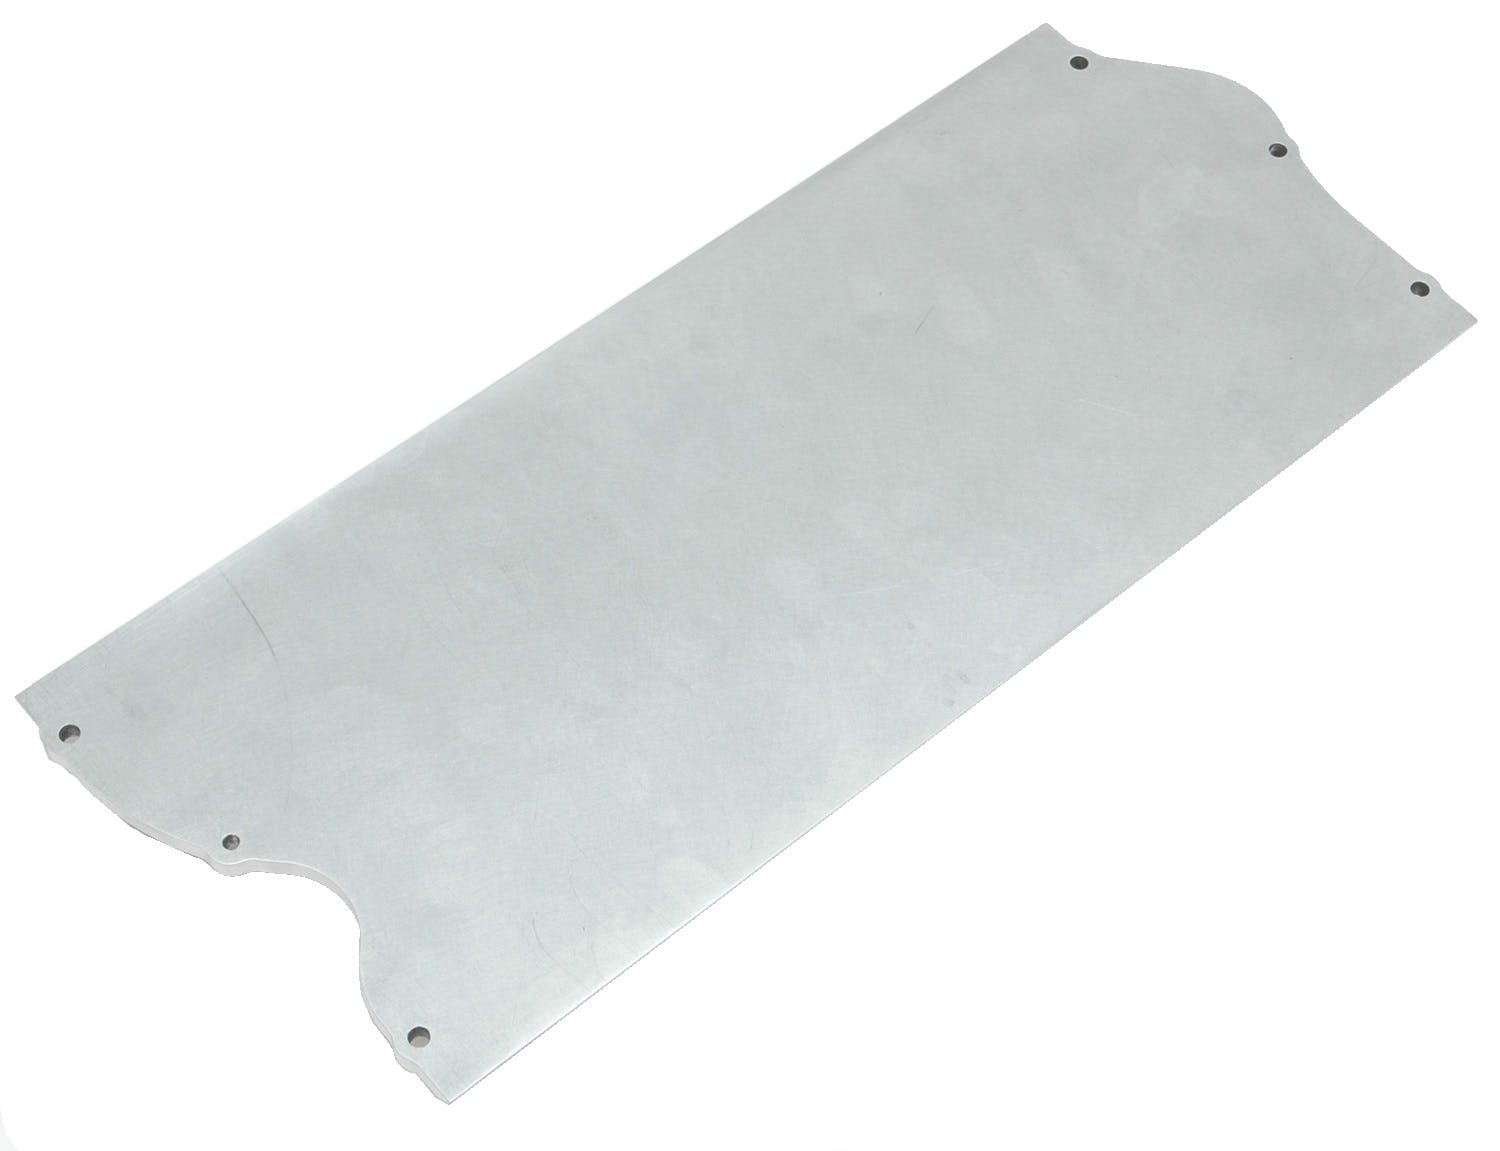 Edelbrock 2833 FORD 9.5 DECK VALLEY COVER FOR MANIFOLD